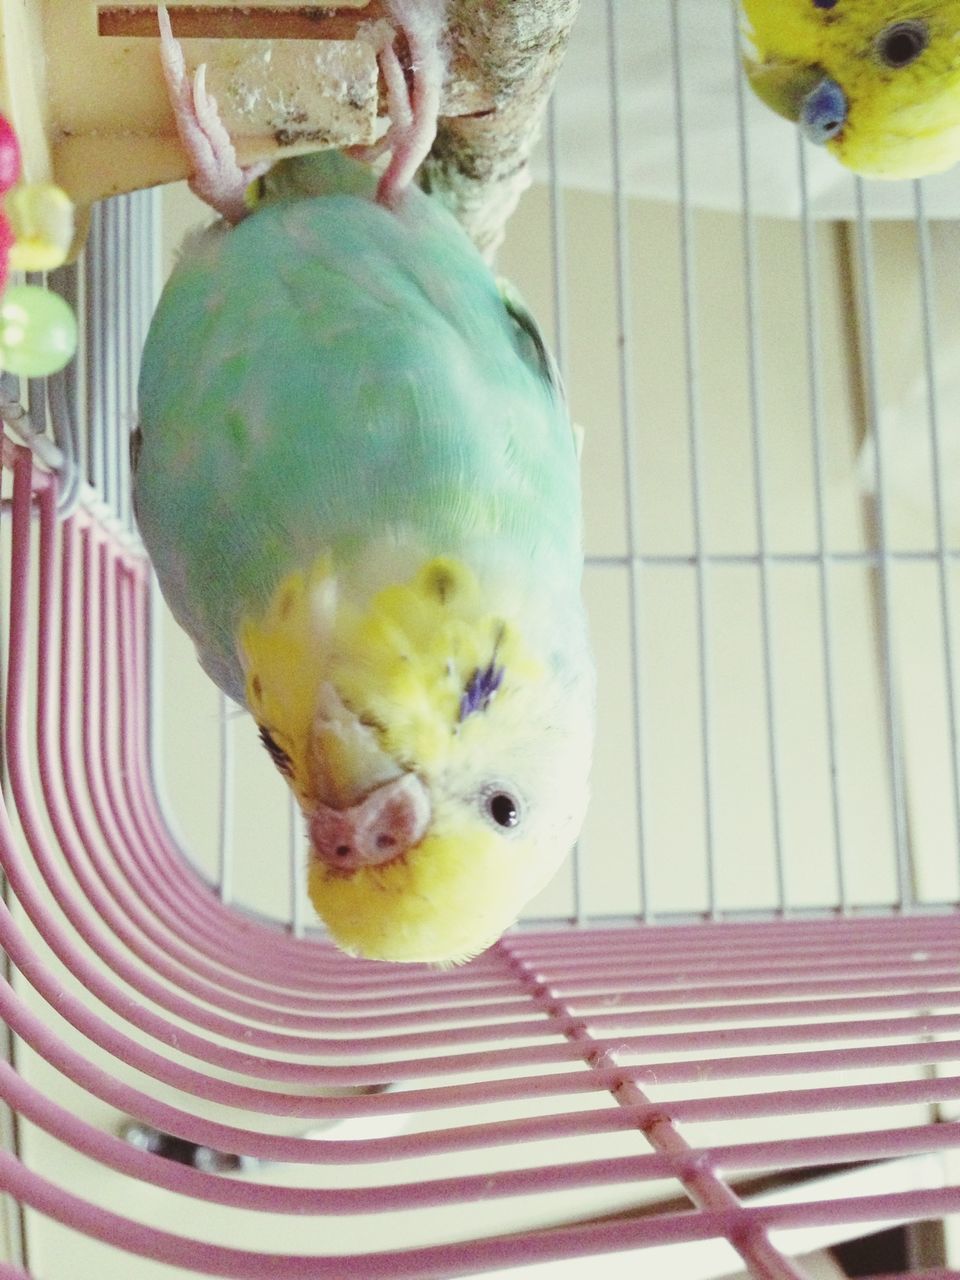 animal themes, bird, one animal, cage, indoors, parrot, pets, domestic animals, multi colored, animals in captivity, birdcage, dog, close-up, animal representation, toy, animal head, animals in the wild, yellow, beak, stuffed toy